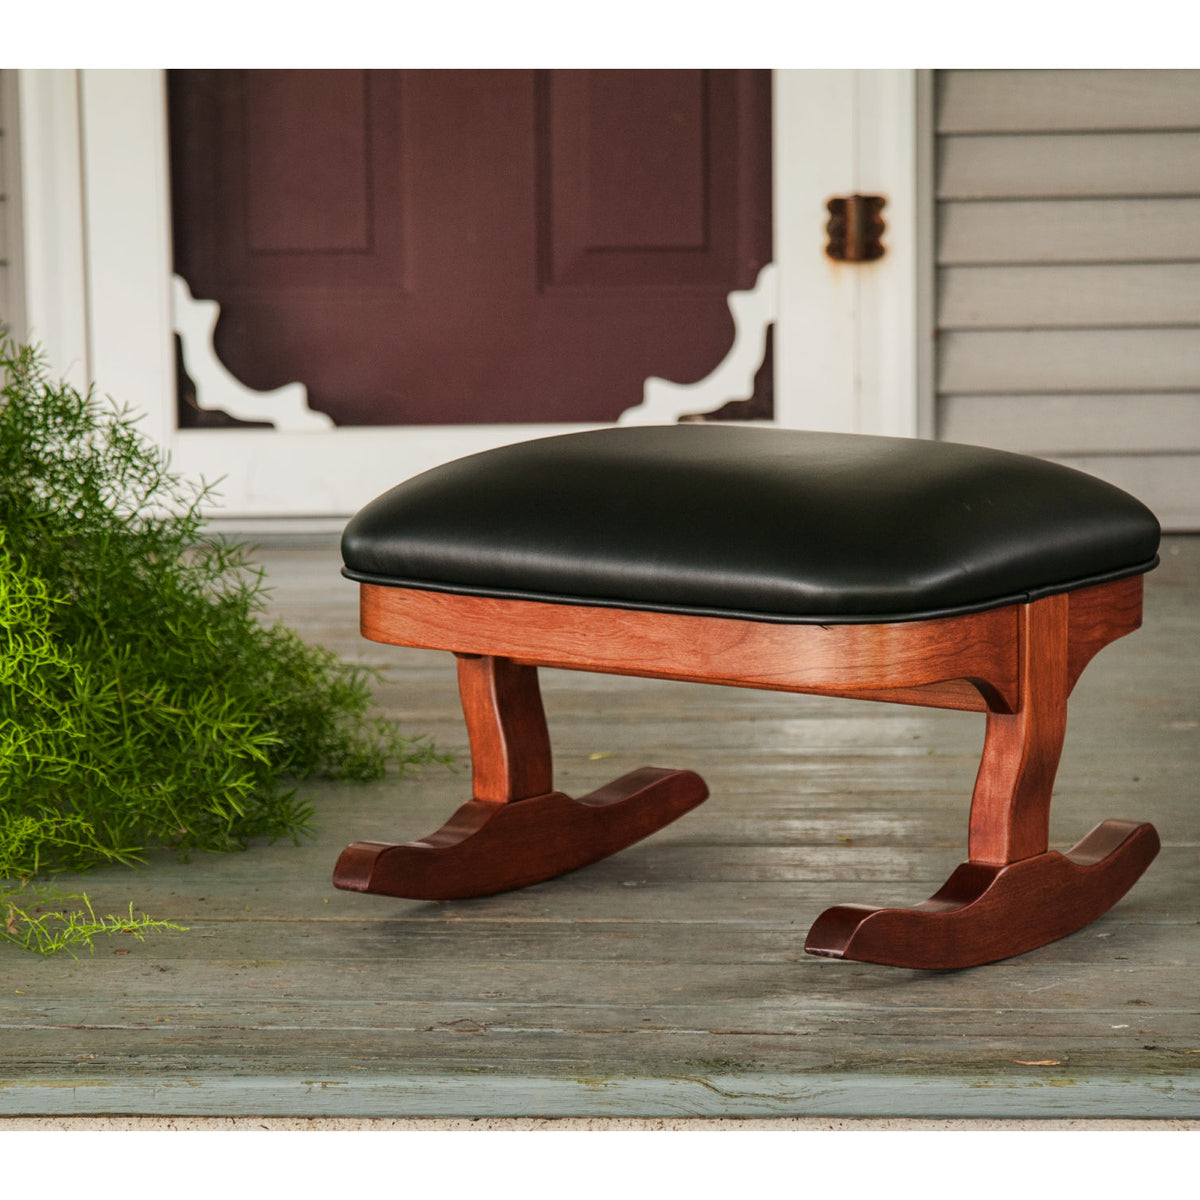 Custom Walnut Rocking Footstool - Shipping Included by Wood In Motion